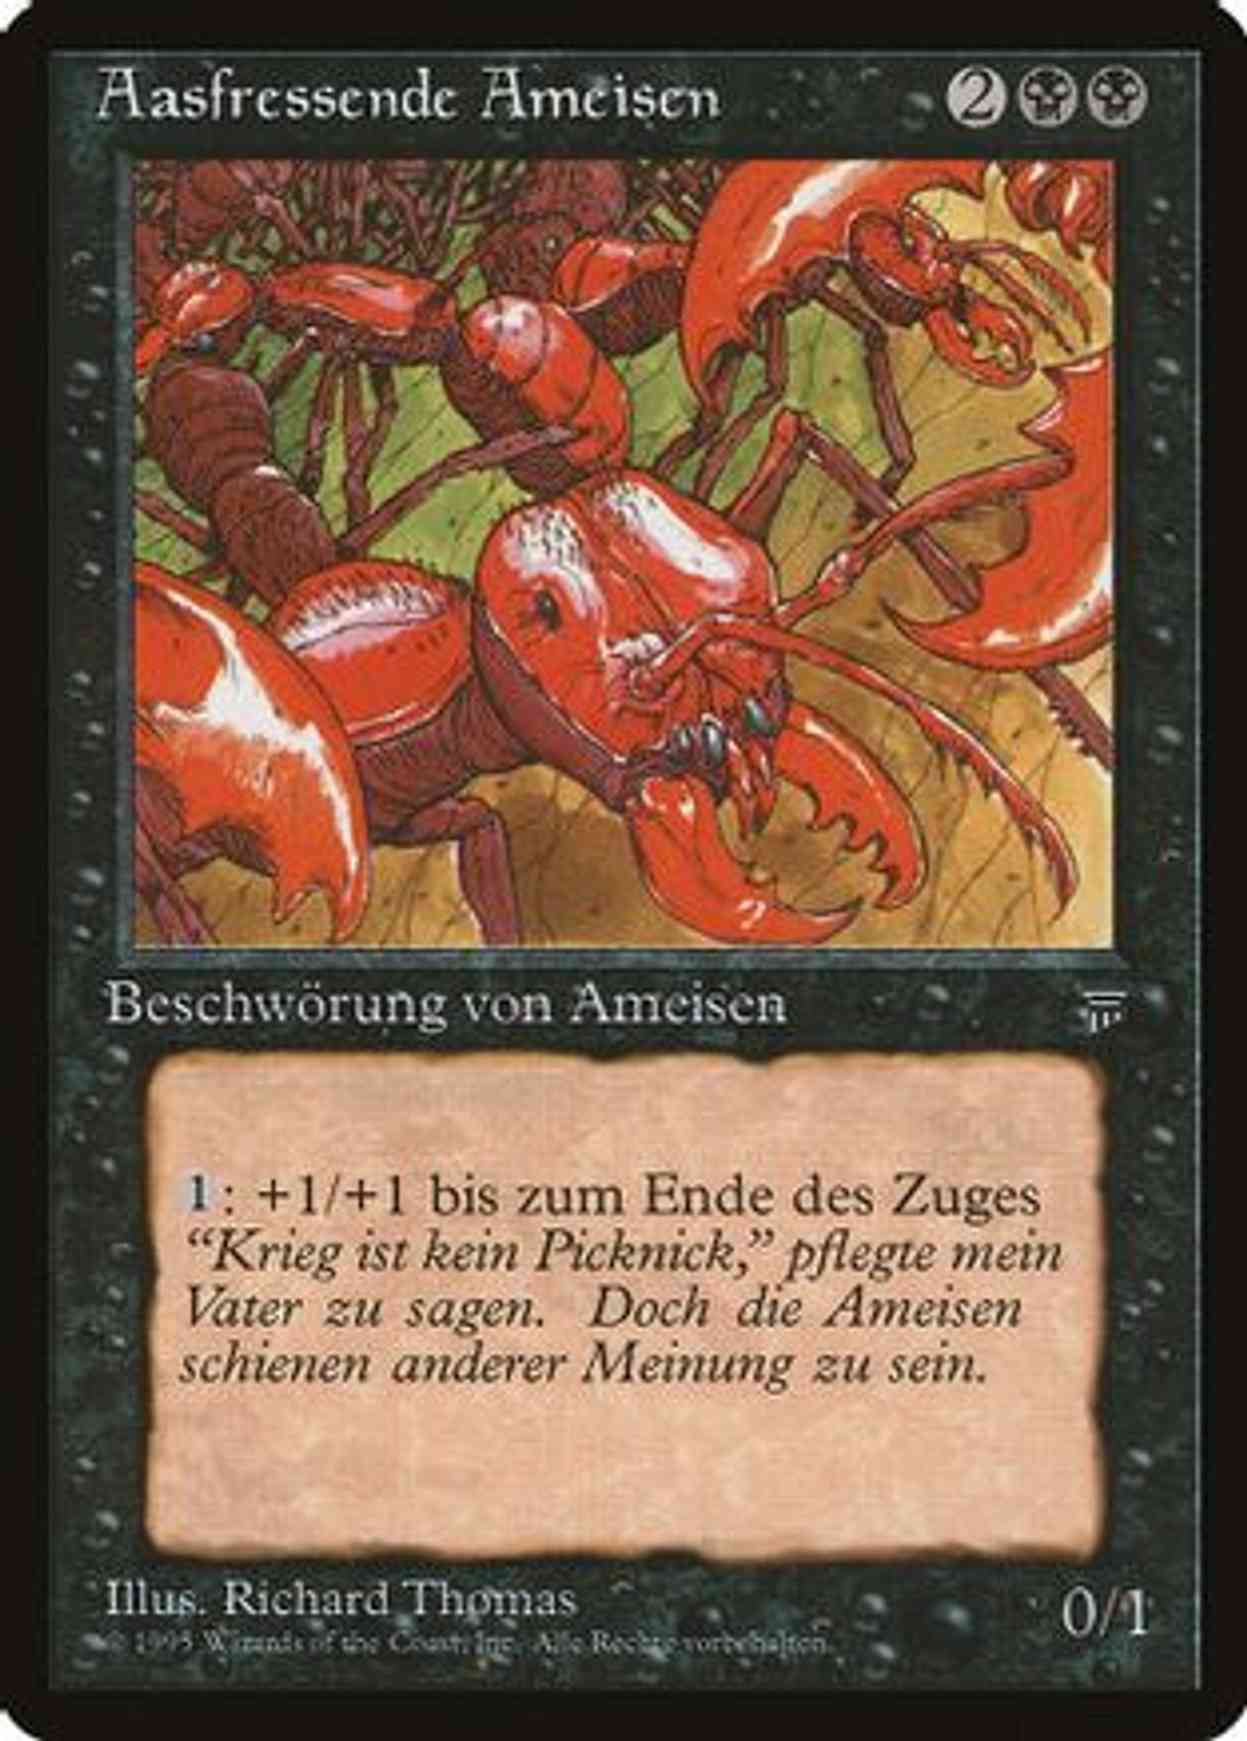 Carrion Ants (German) - "Aasfressende Ameisen" magic card front